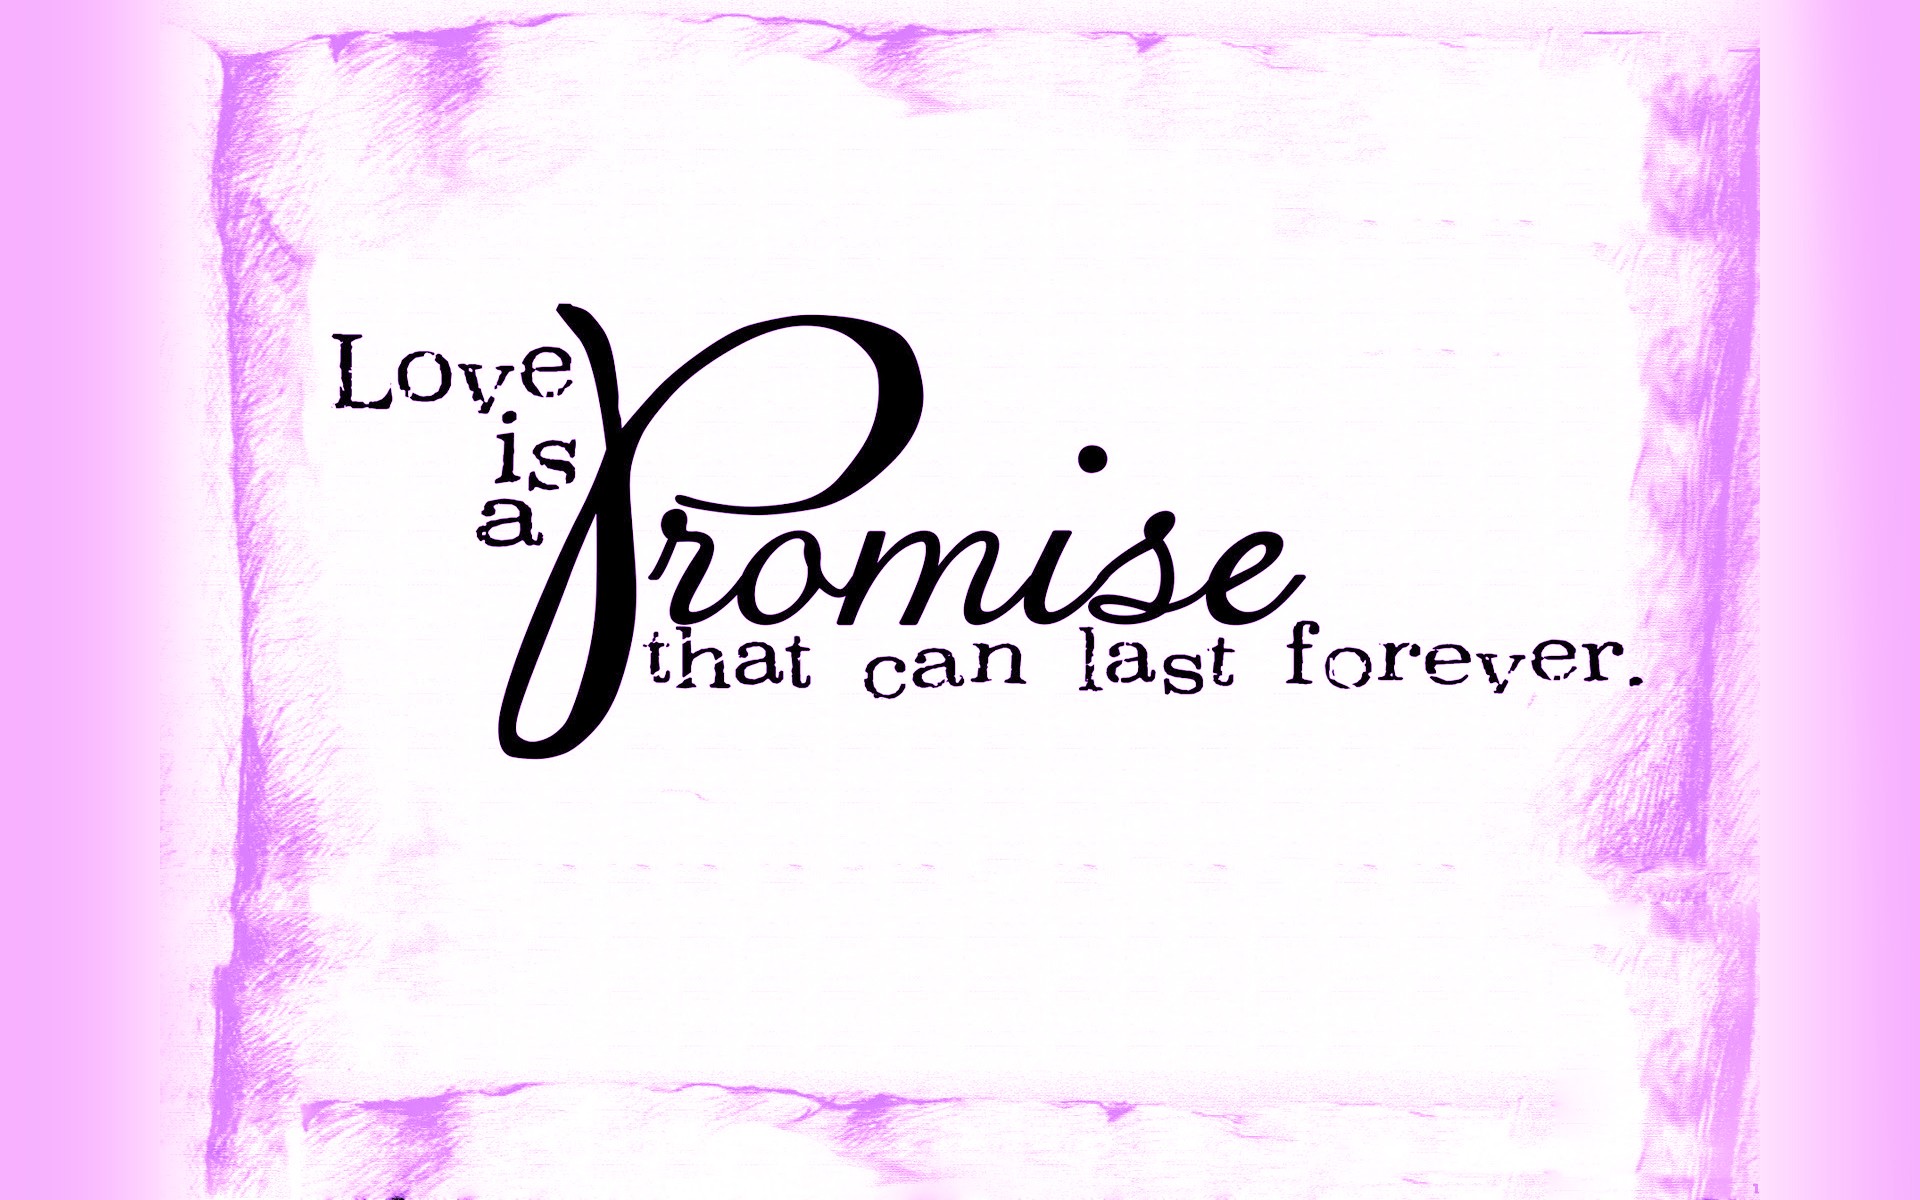 Promise Day Images Hd - HD Wallpaper 